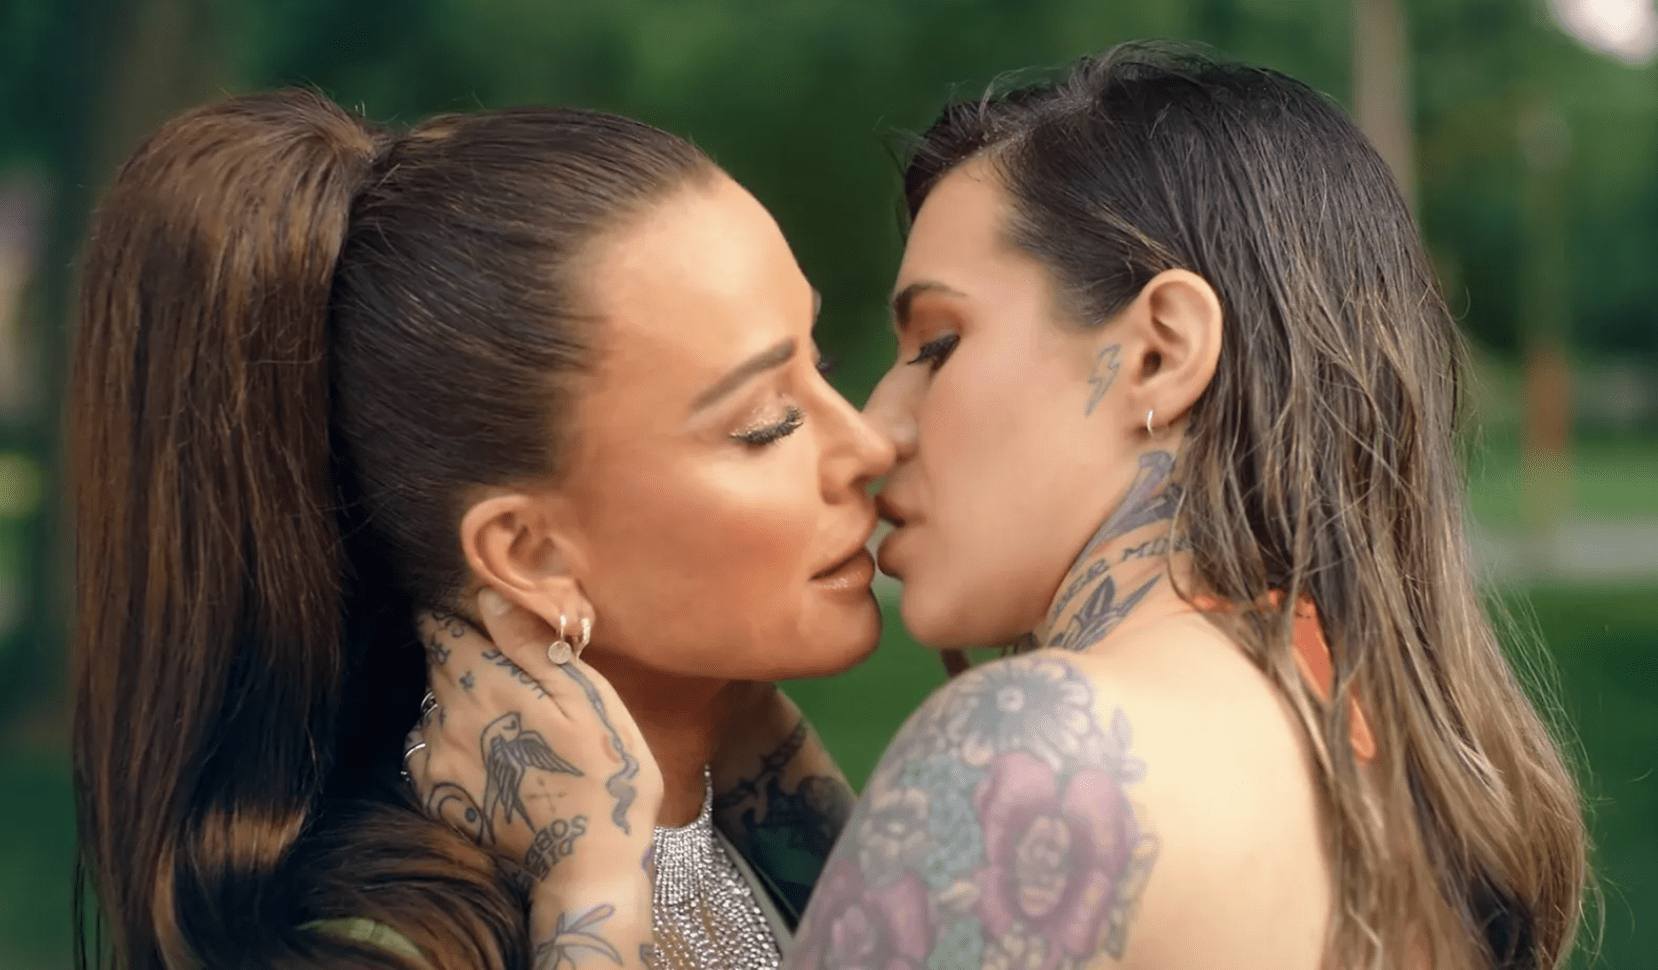 ‘RHOBH’ Star Kyle Richards and Morgan Wade Confirm Their Lesbian Affair In New Music Video